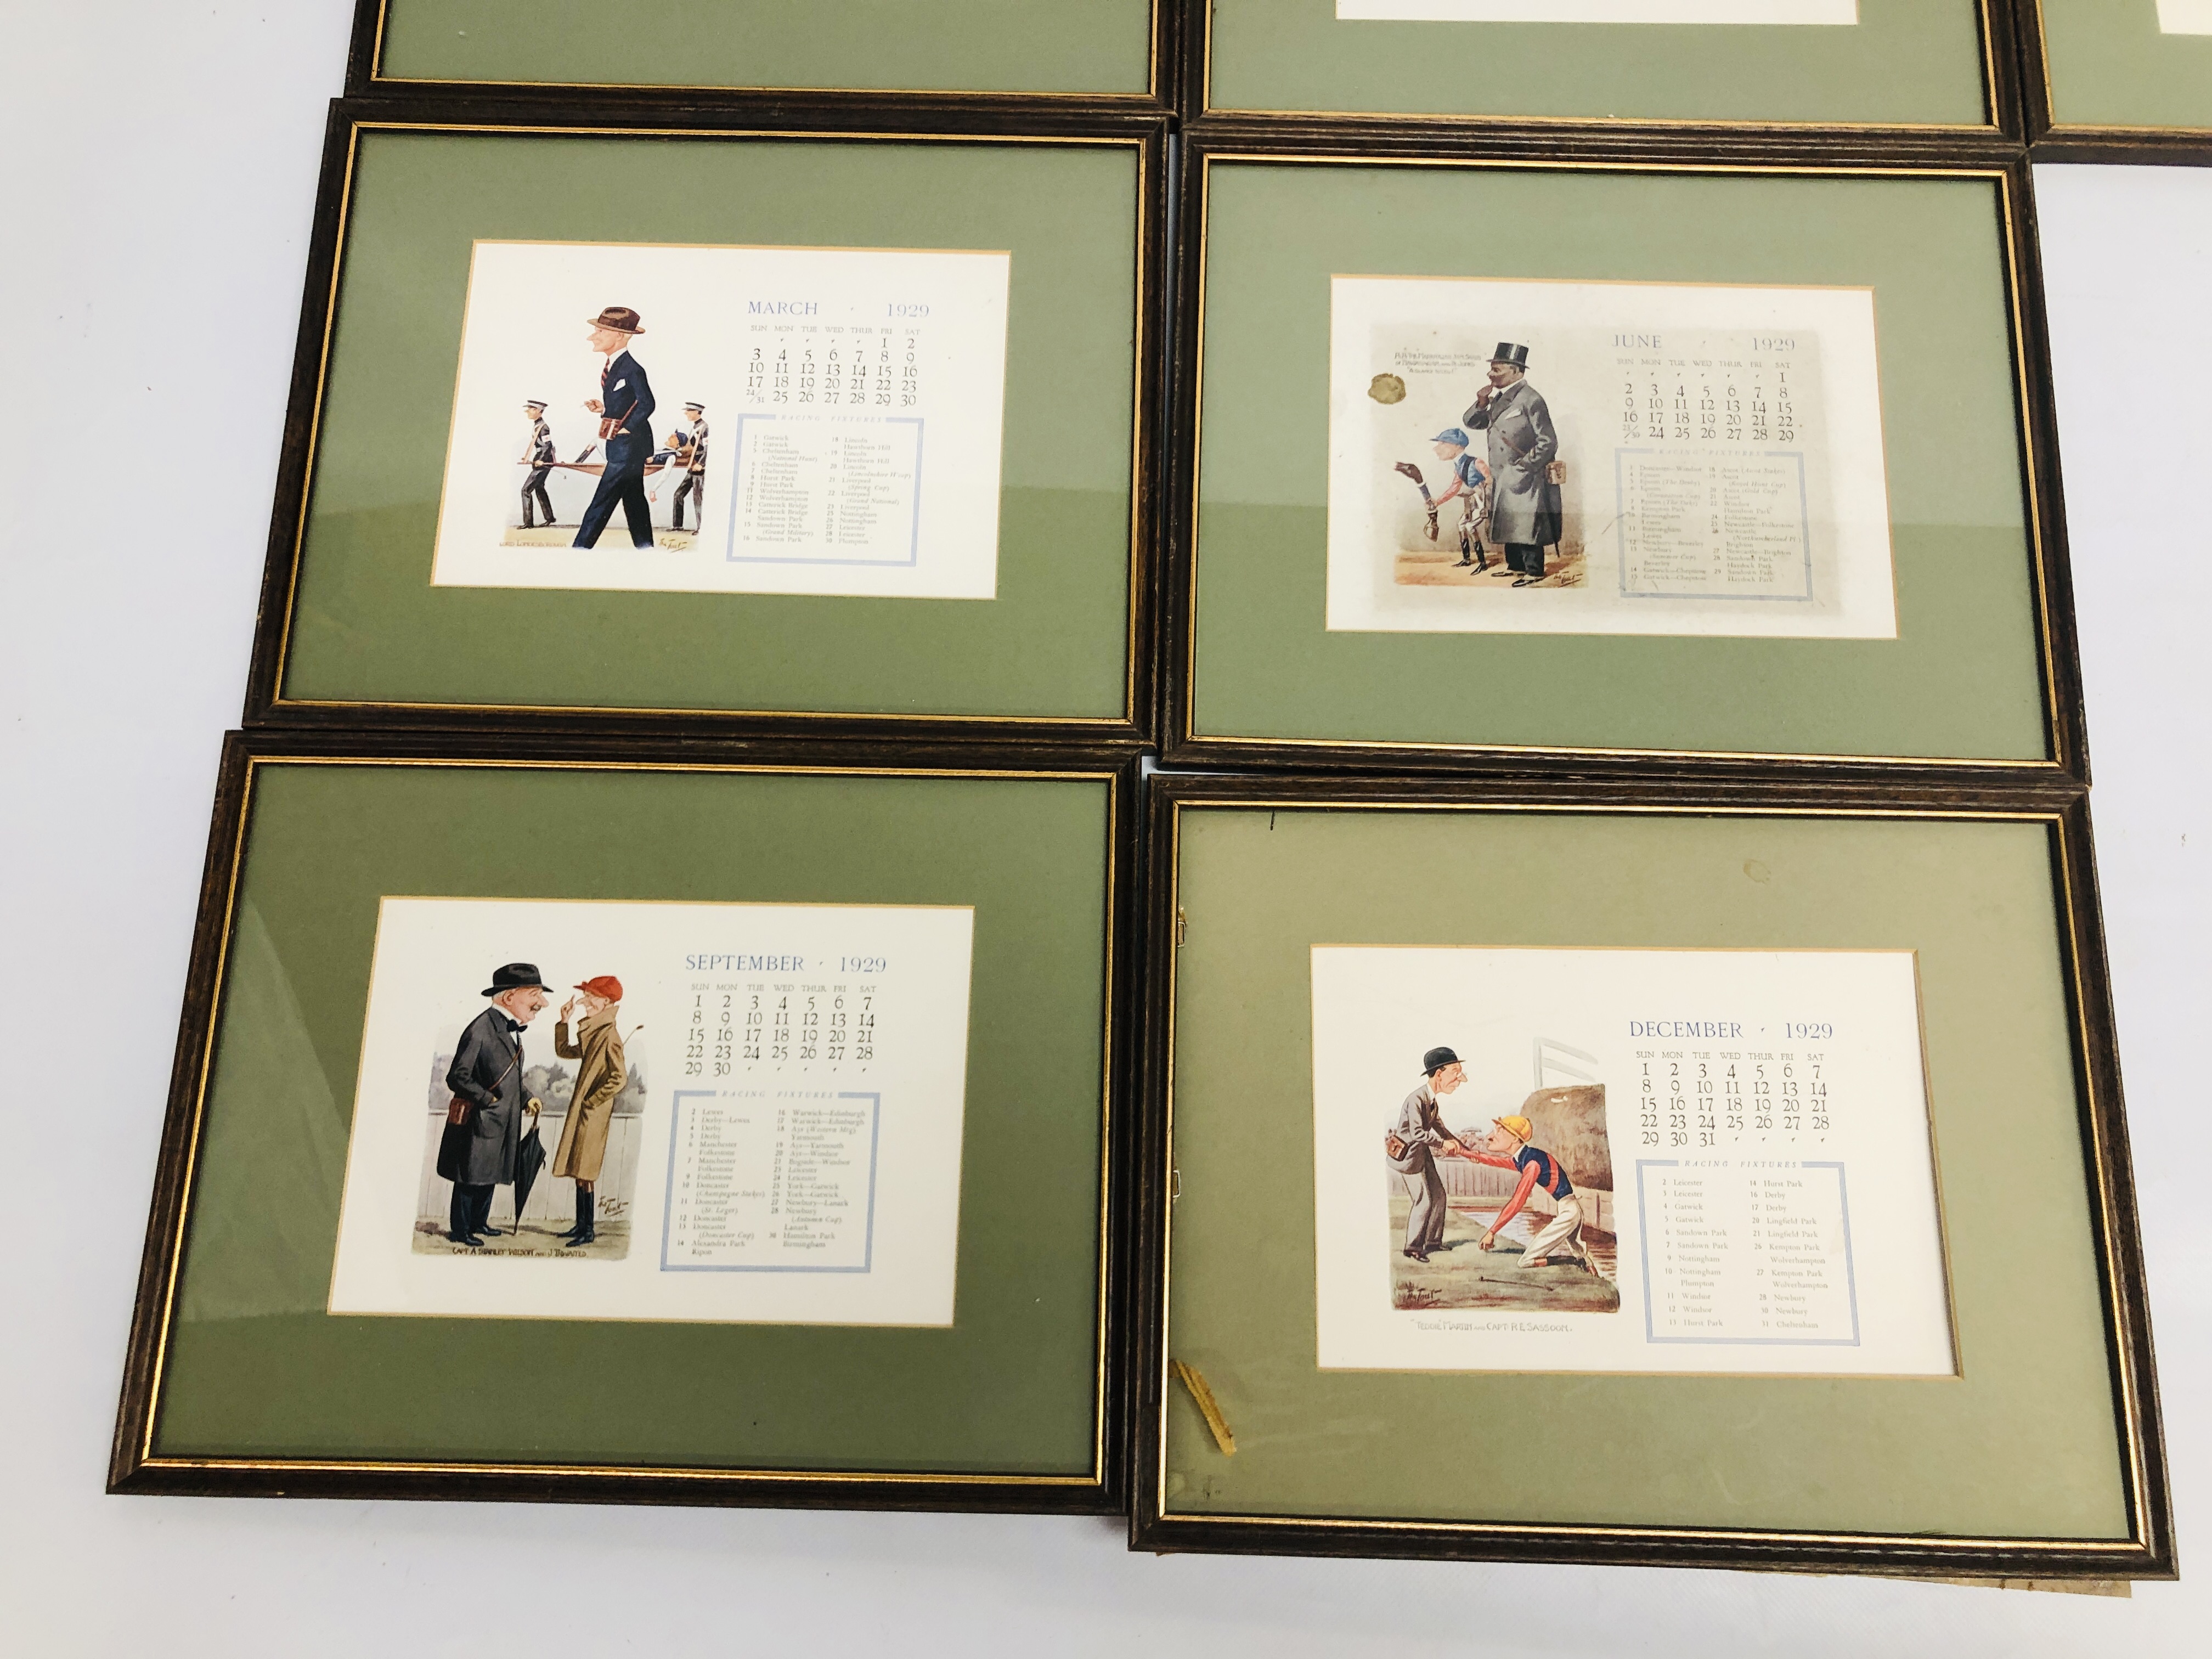 A COLLECTION OF 12 FRAMED CALENDAR RACING FIXTURES. - Image 4 of 4